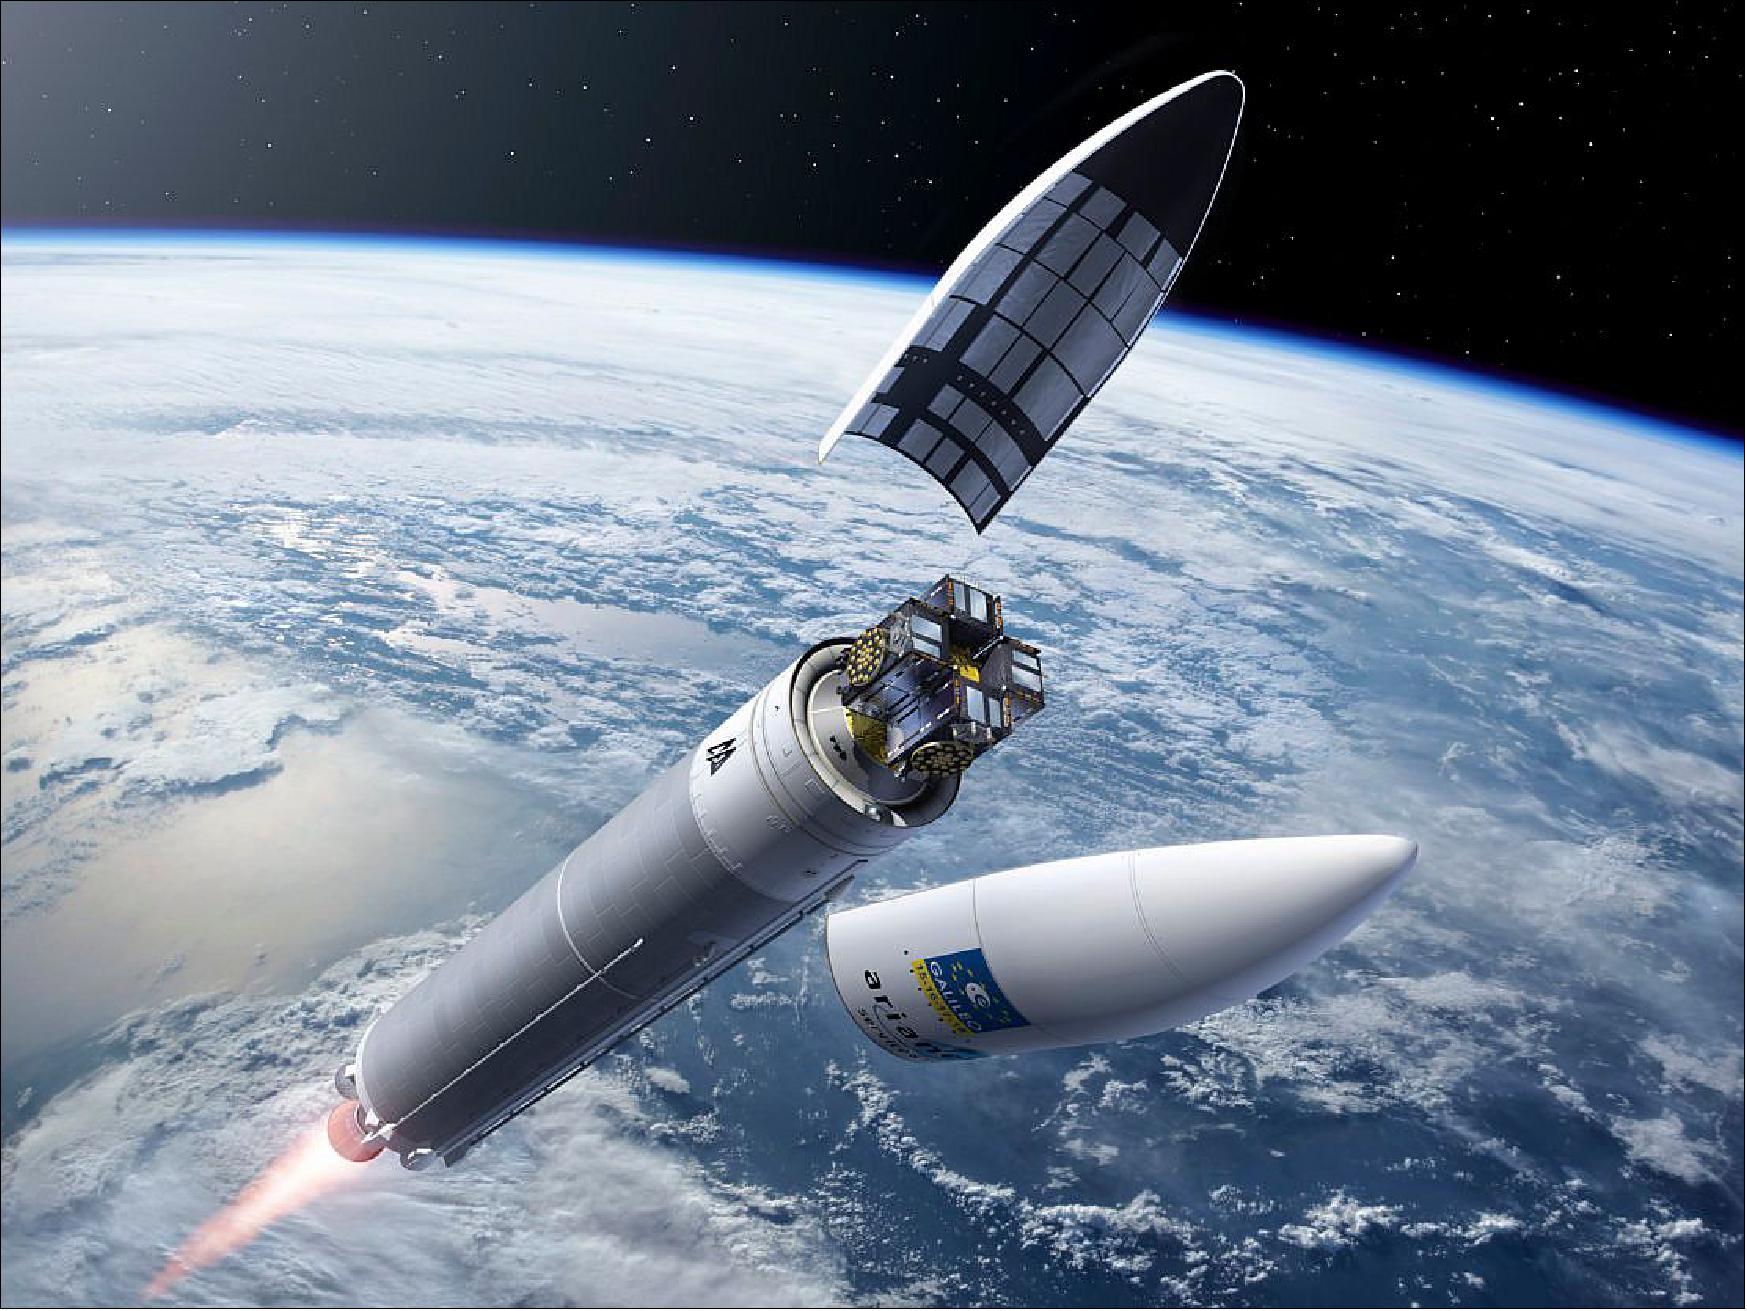 Figure 24: Above Earth's atmosphere, Ariane's aerodynamic fairing is jettisoned and the four Galileo satellites ‘see' space for the first time (image credit: ESA, P. Caril) 32)